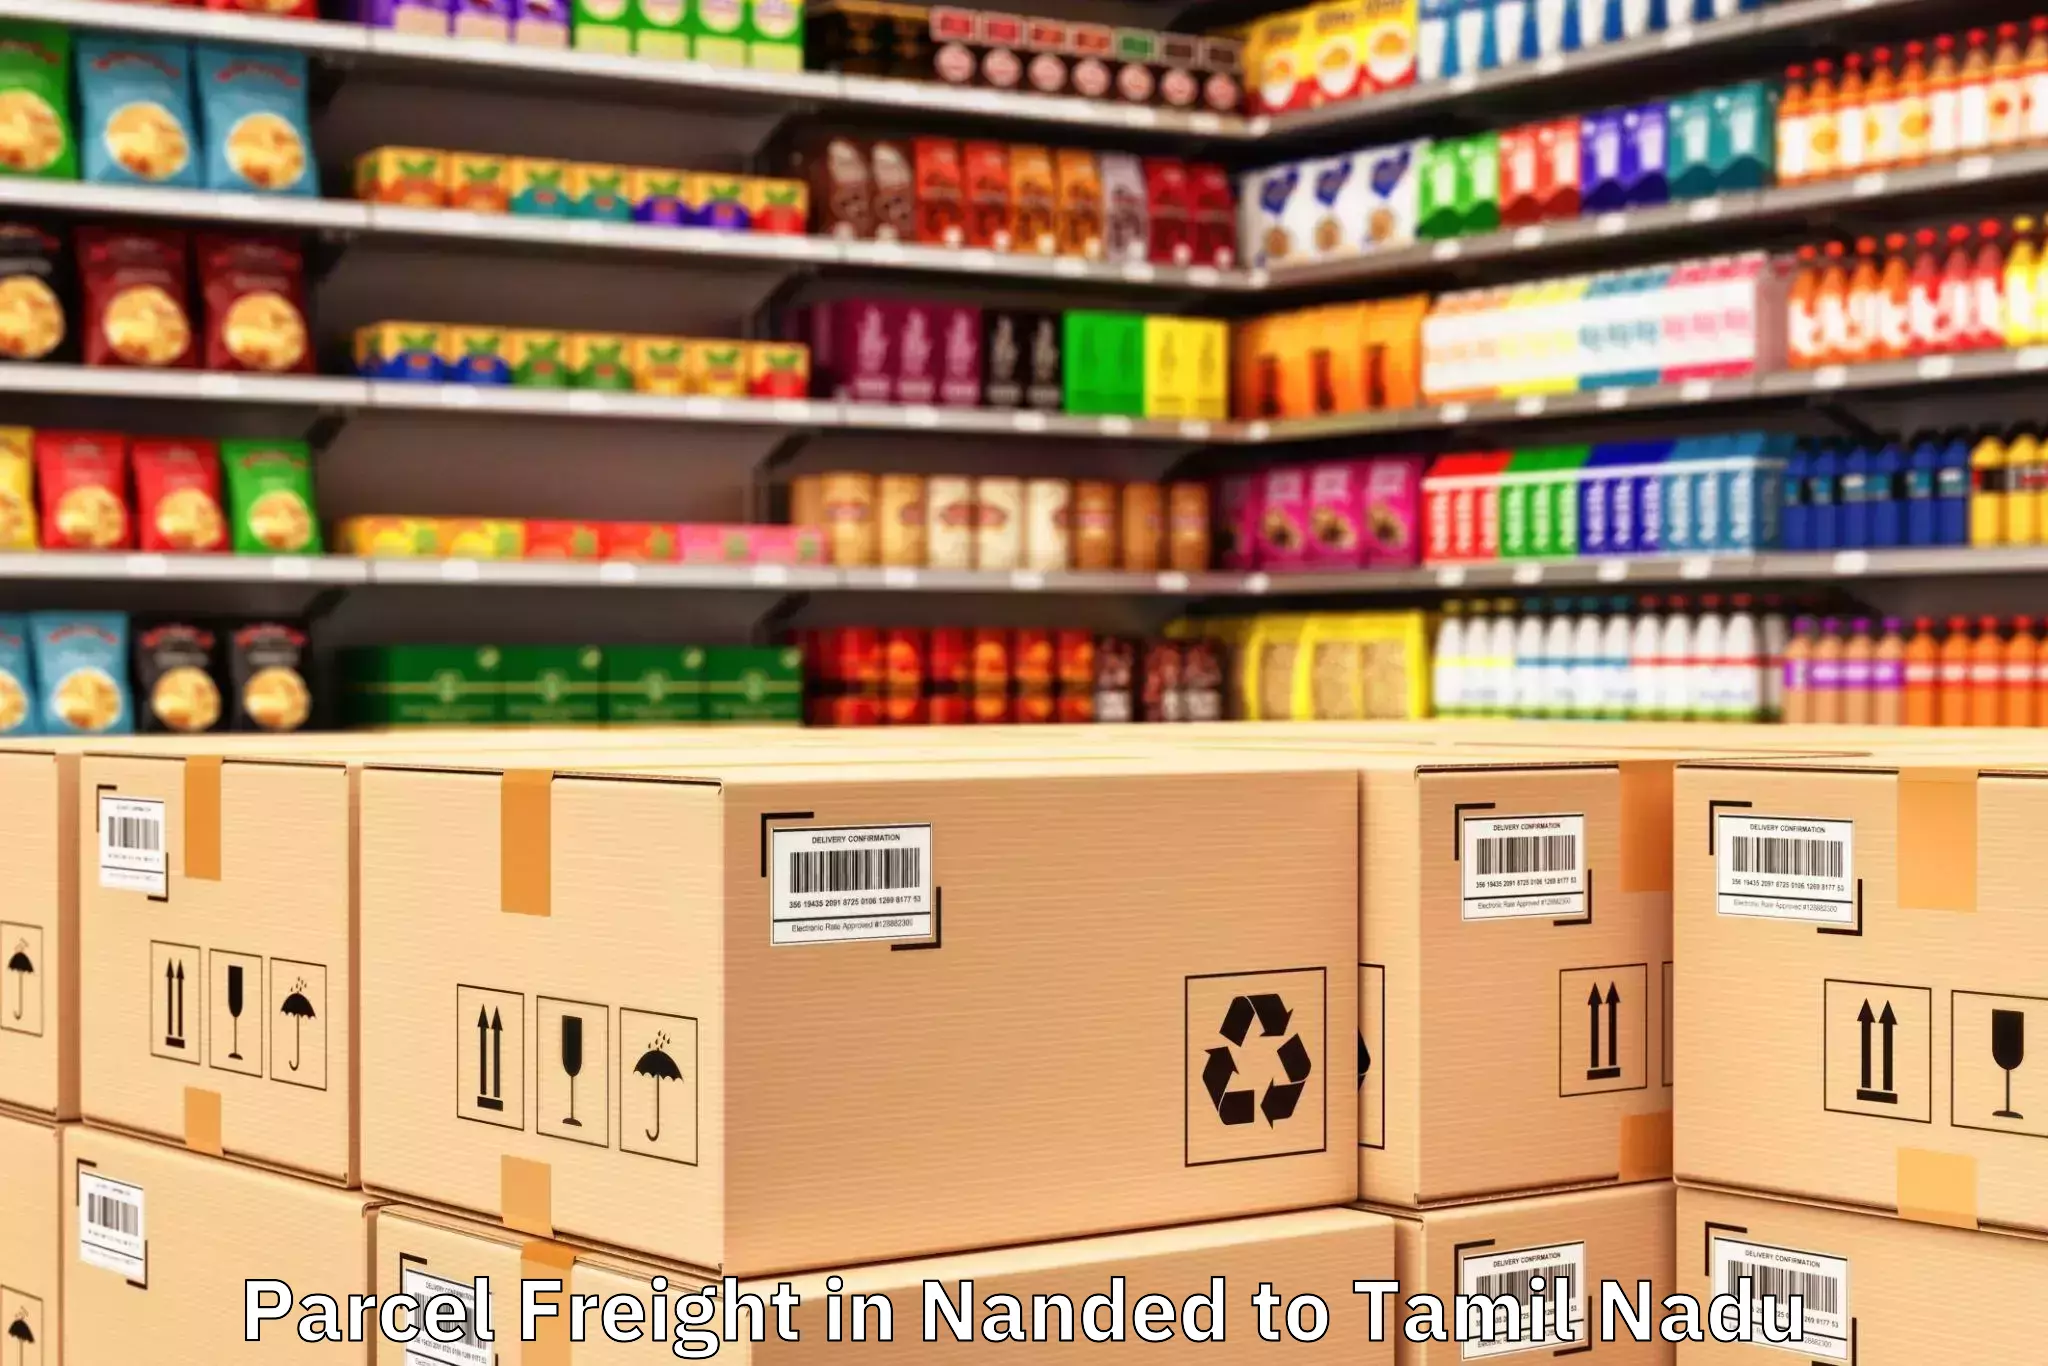 Nanded to Chennai Port Trust Parcel Freight Booking